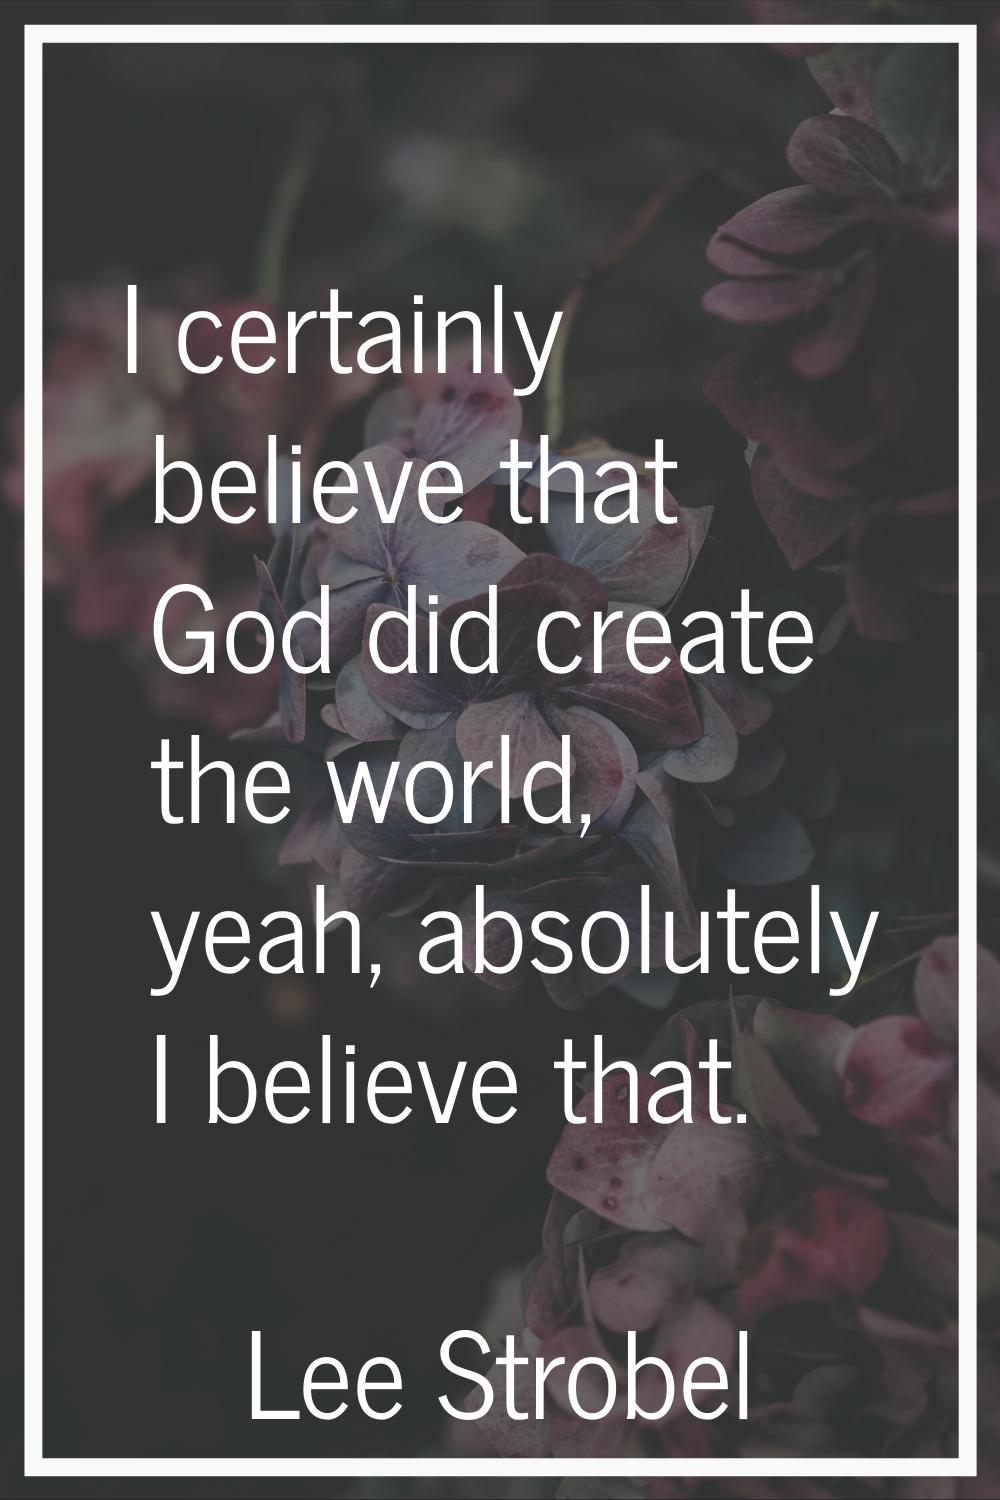 I certainly believe that God did create the world, yeah, absolutely I believe that.